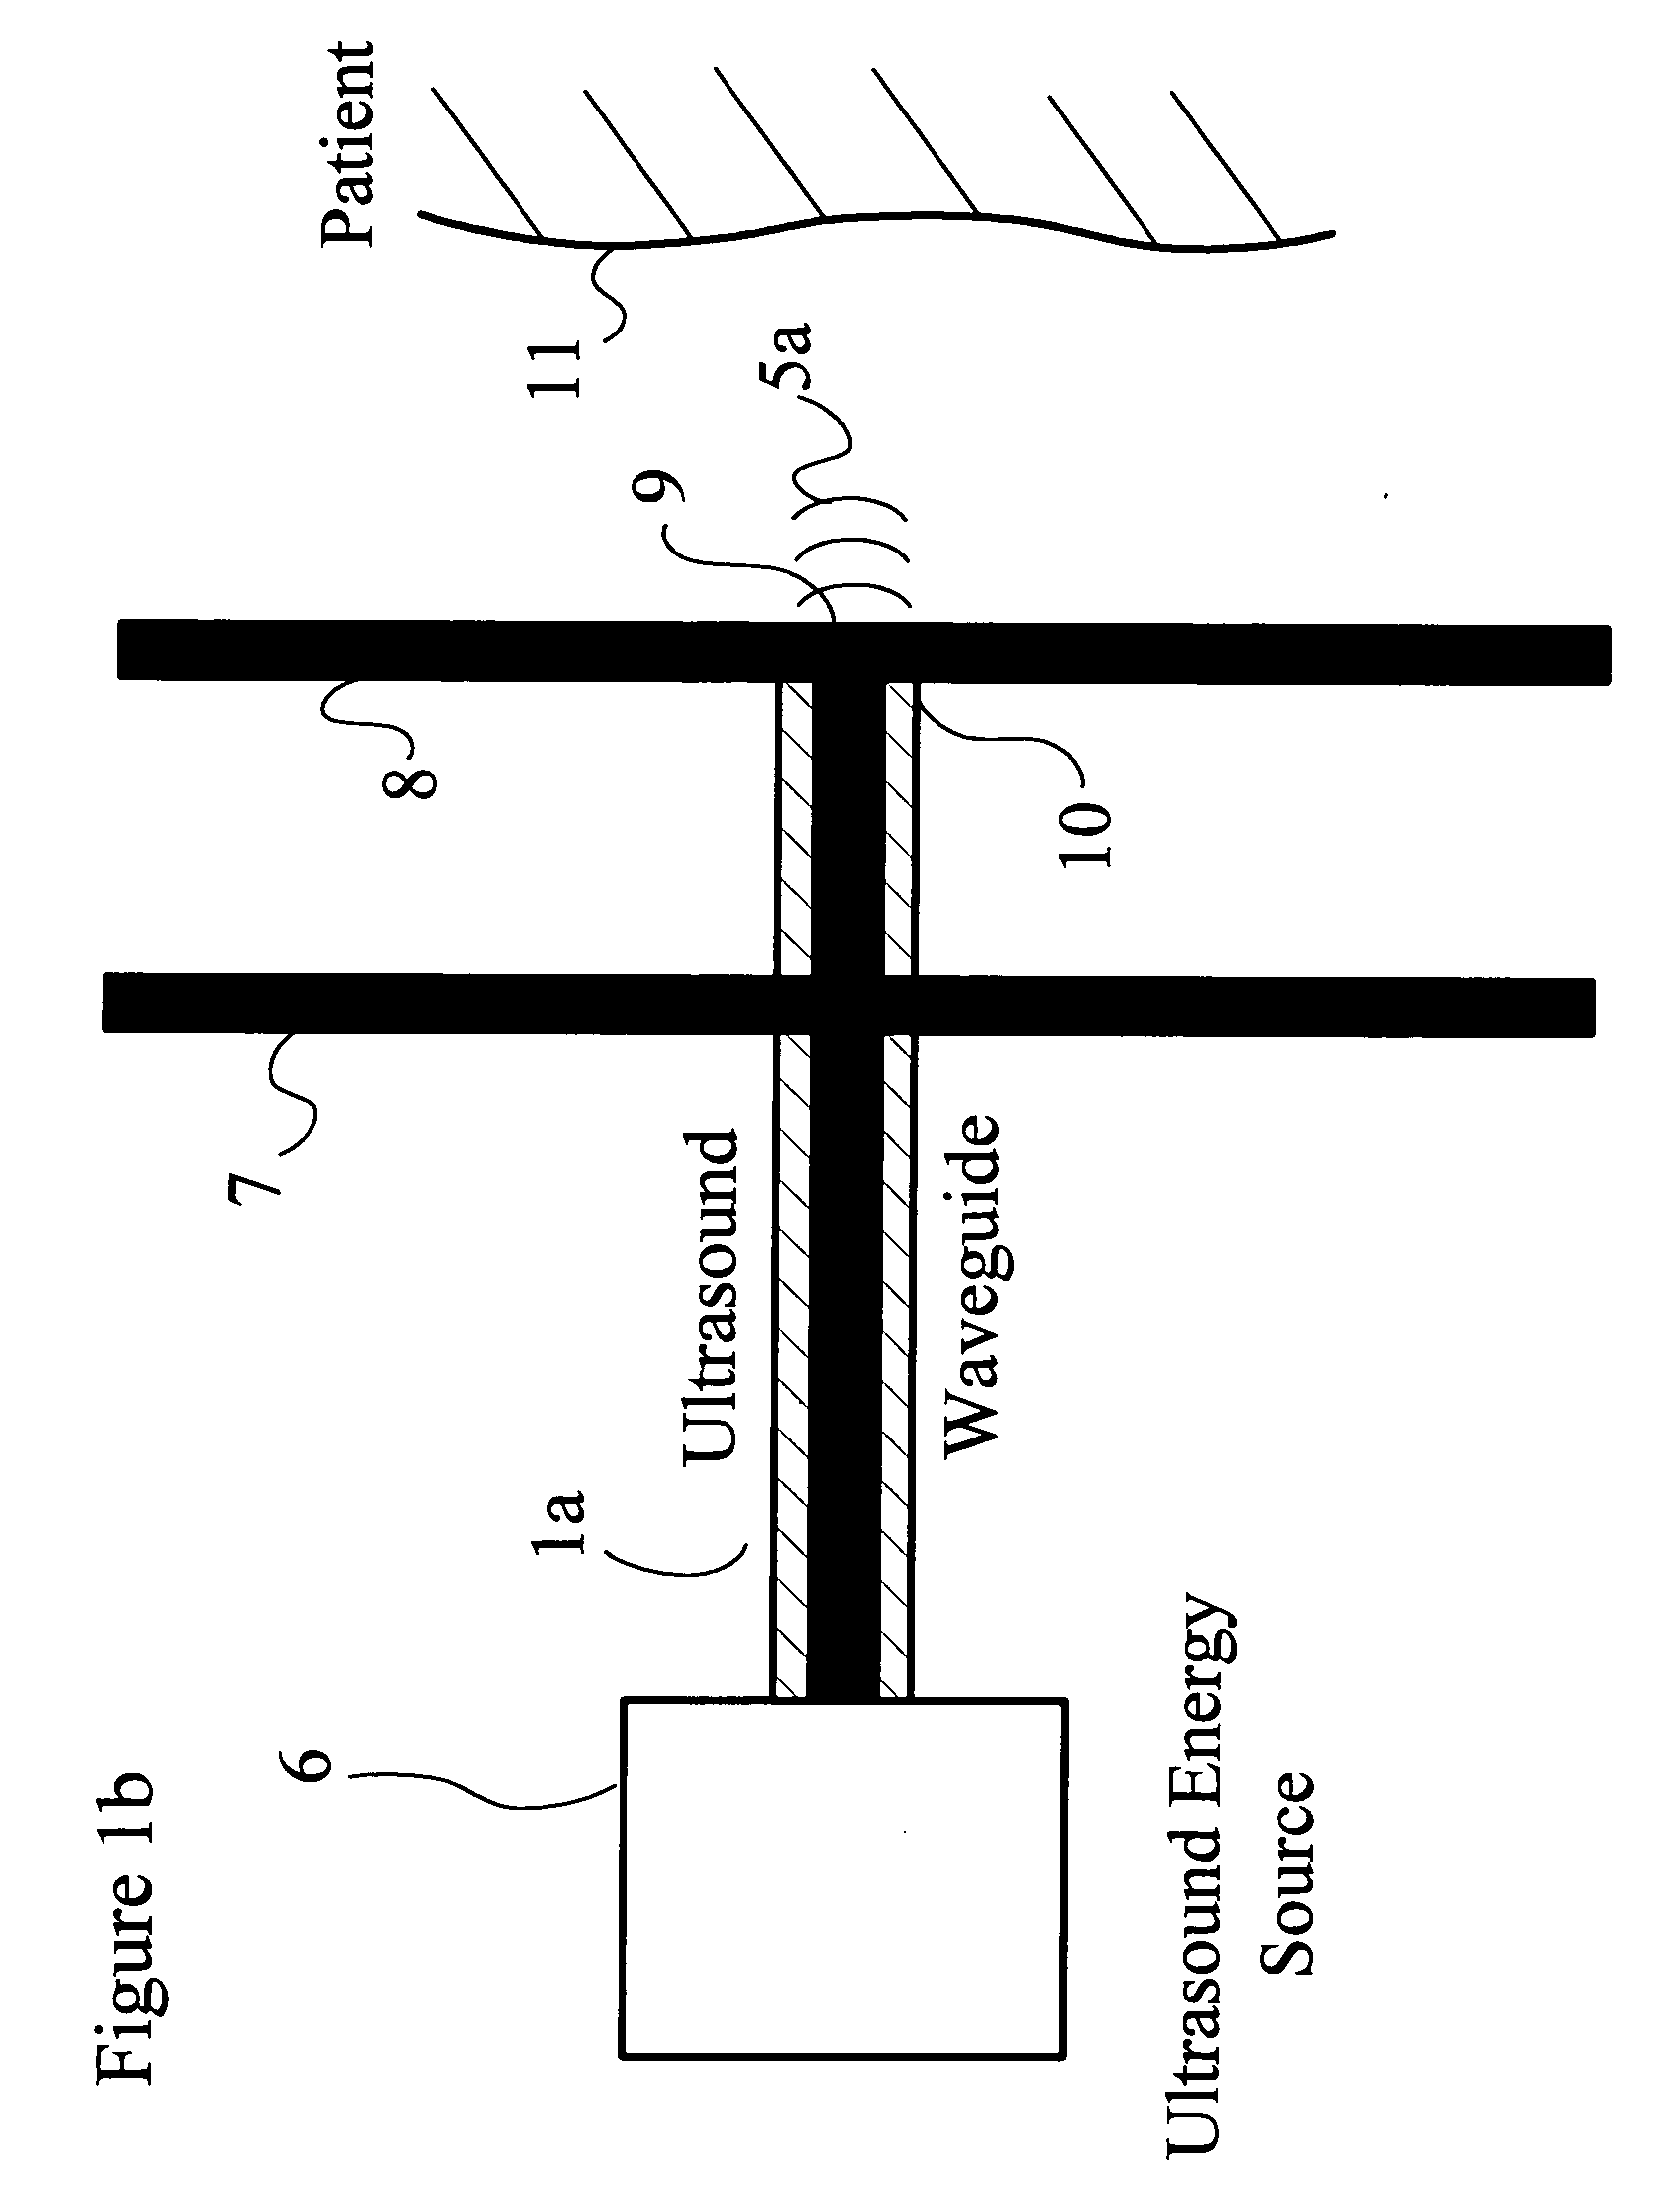 Ultrasonic apparatus and method for treating obesity or fat-deposits or for delivering cosmetic or other bodily therapy